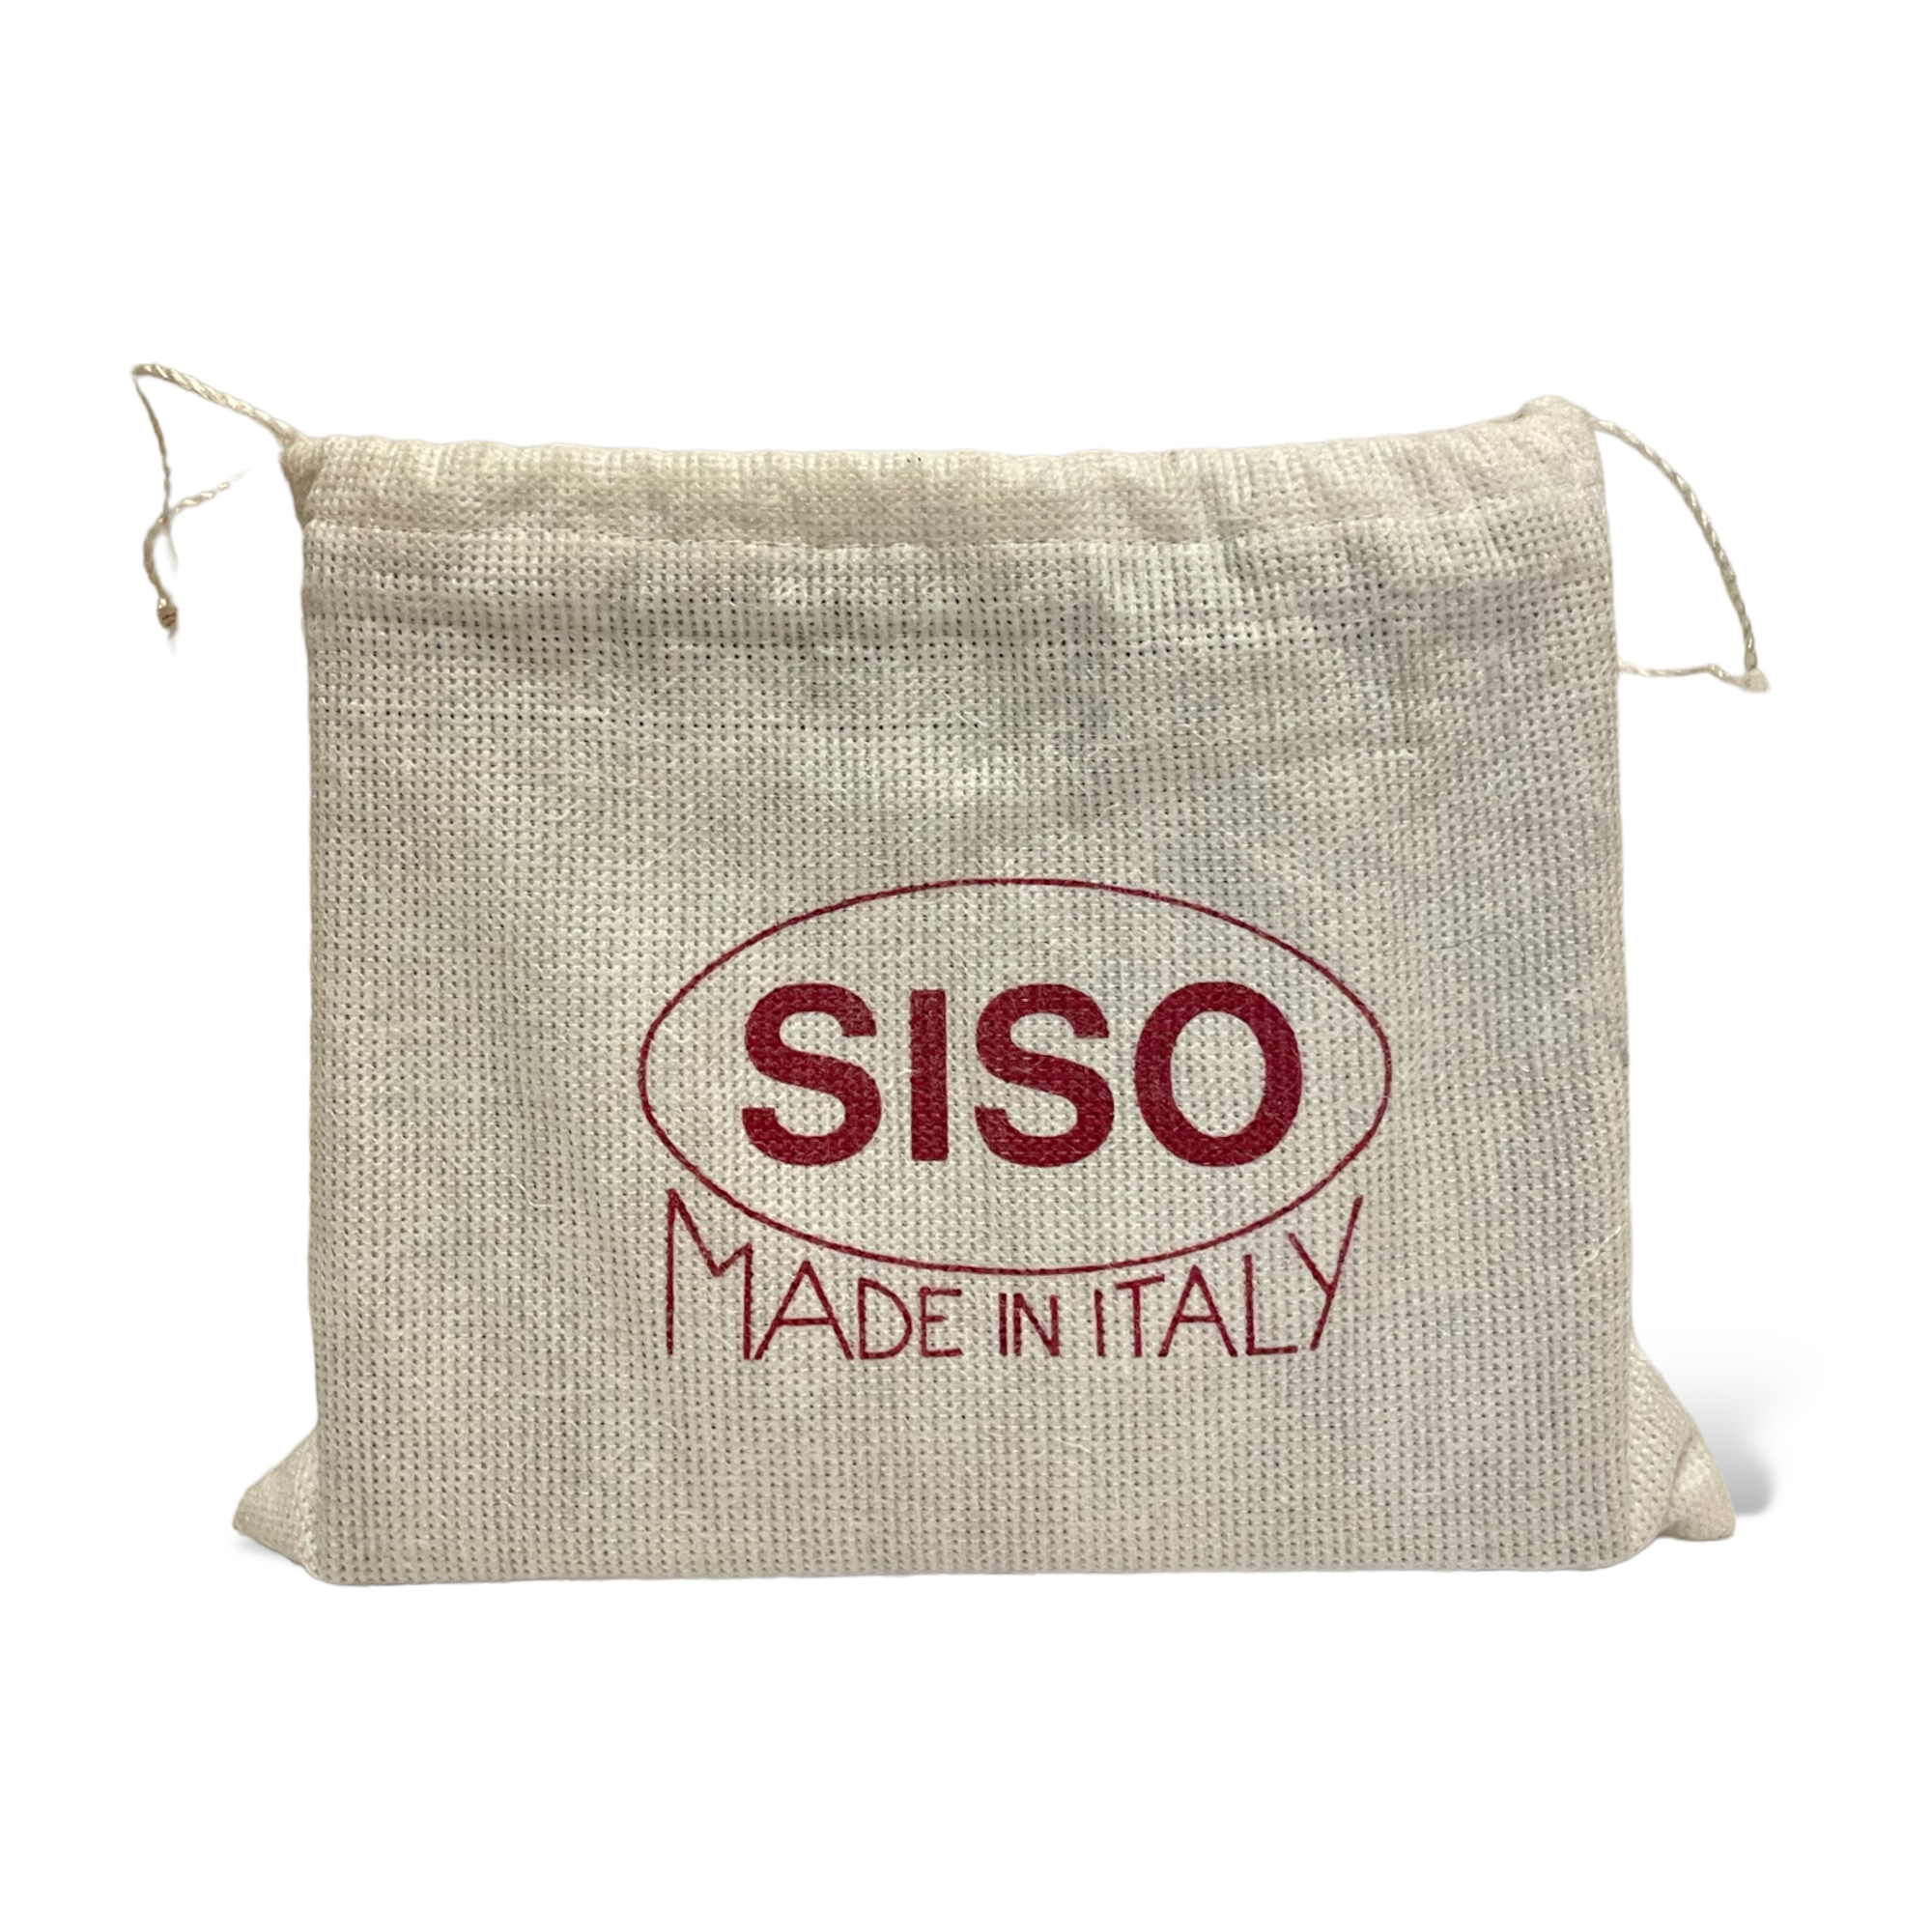 Vintage SISO Made in Italy Clutch/Crossbody Bag